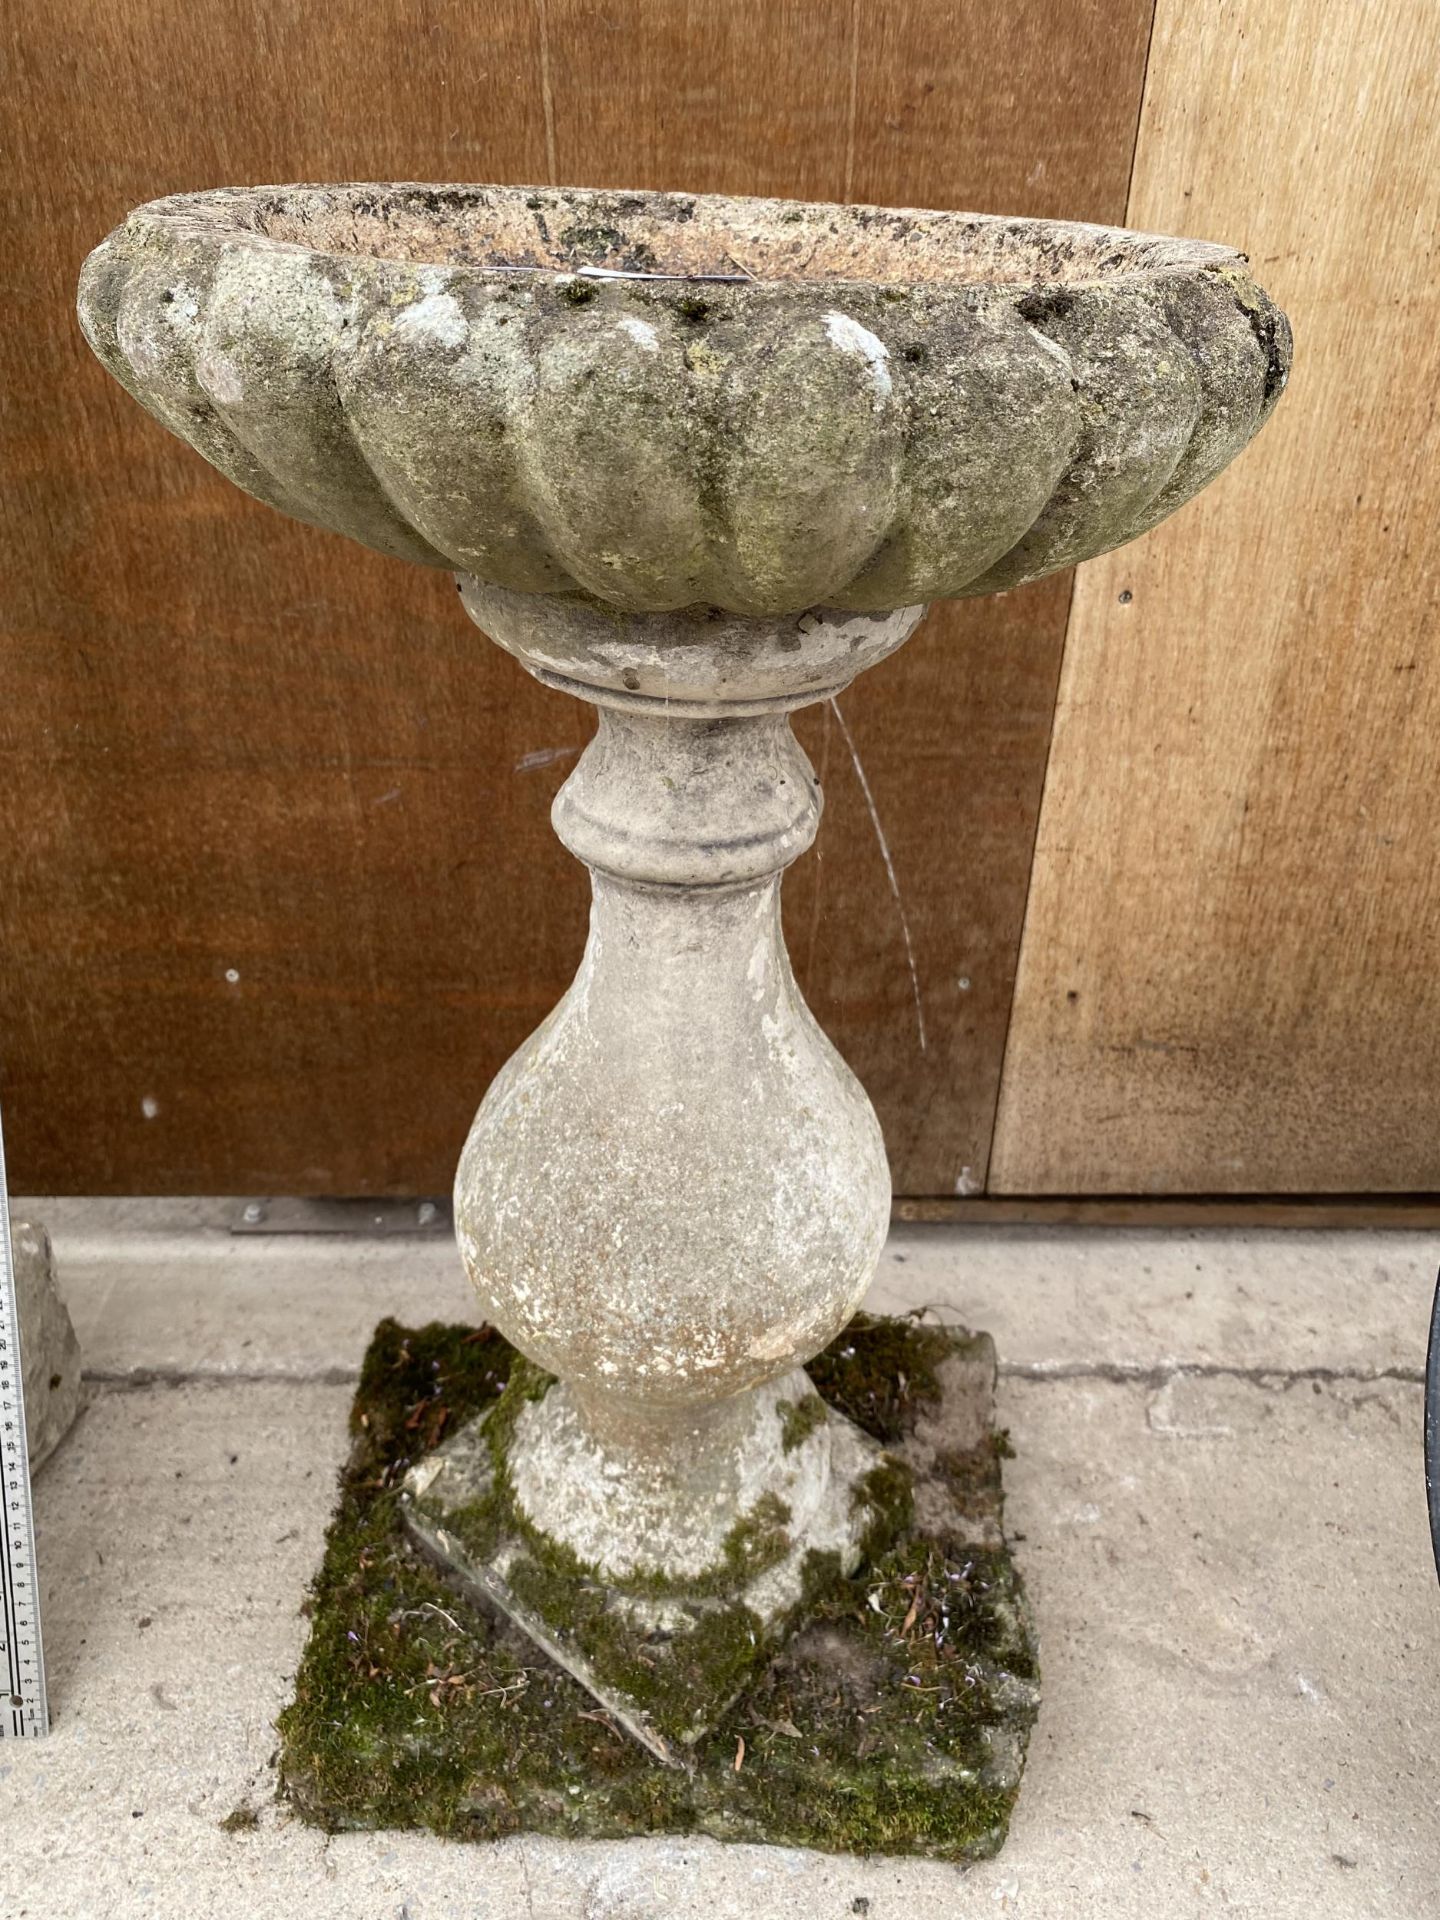 A RECONSTITUTED STONE BIRD BATH WITH PEDESTAL BASE (H:67CM)